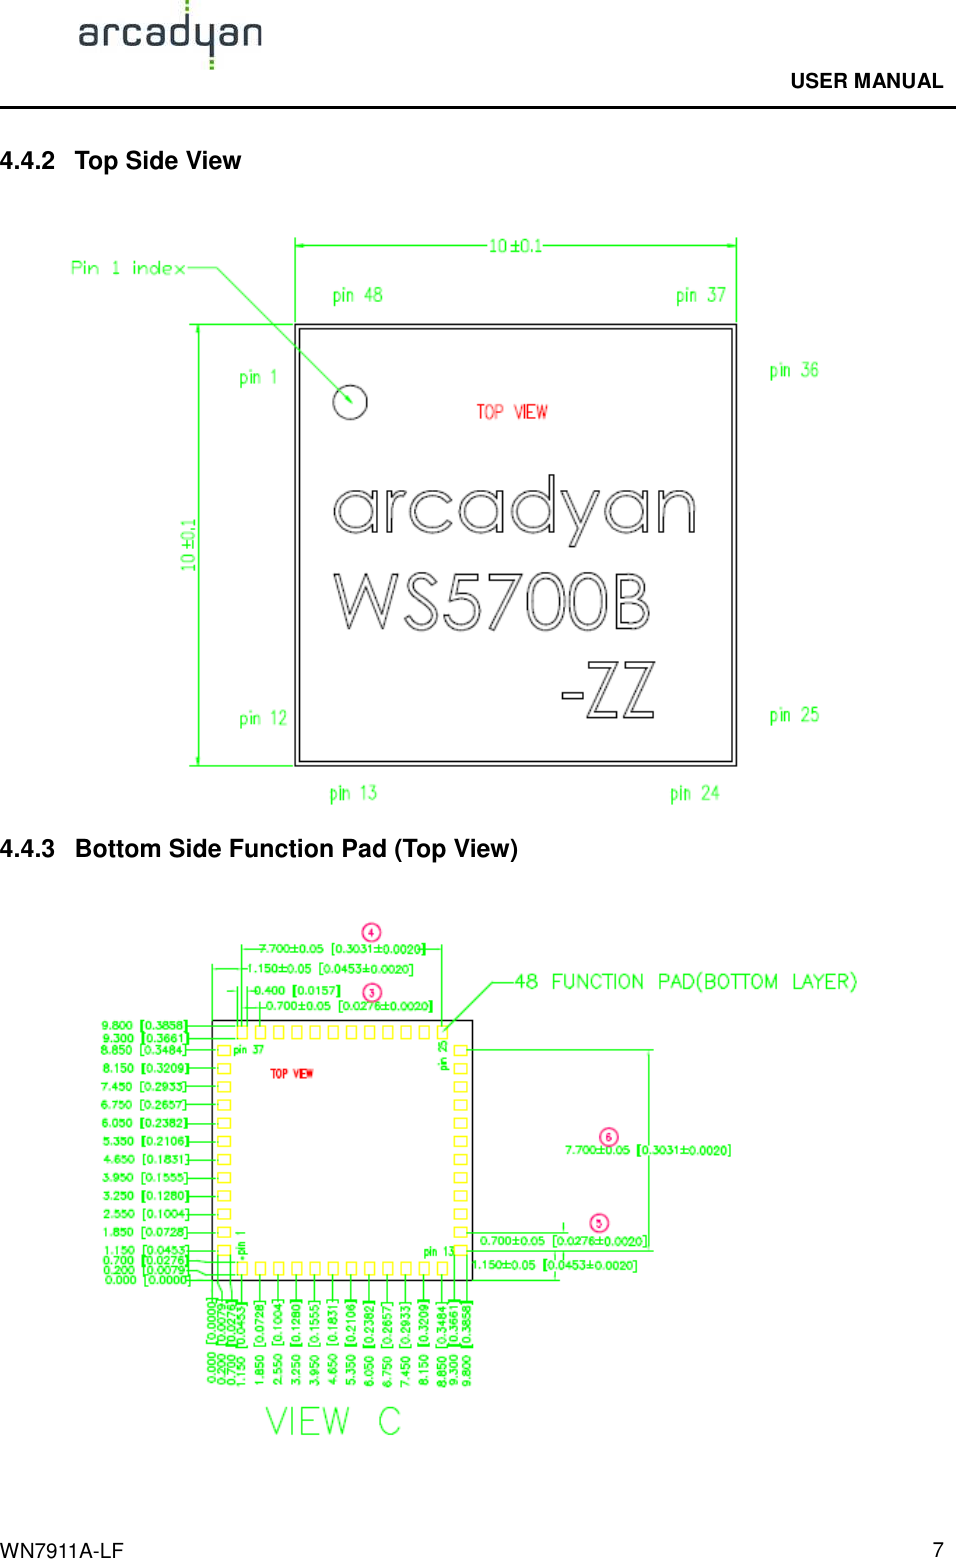                                              USER MANUAL                                              WN7911A-LF  7 4.4.2  Top Side View  4.4.3  Bottom Side Function Pad (Top View)  